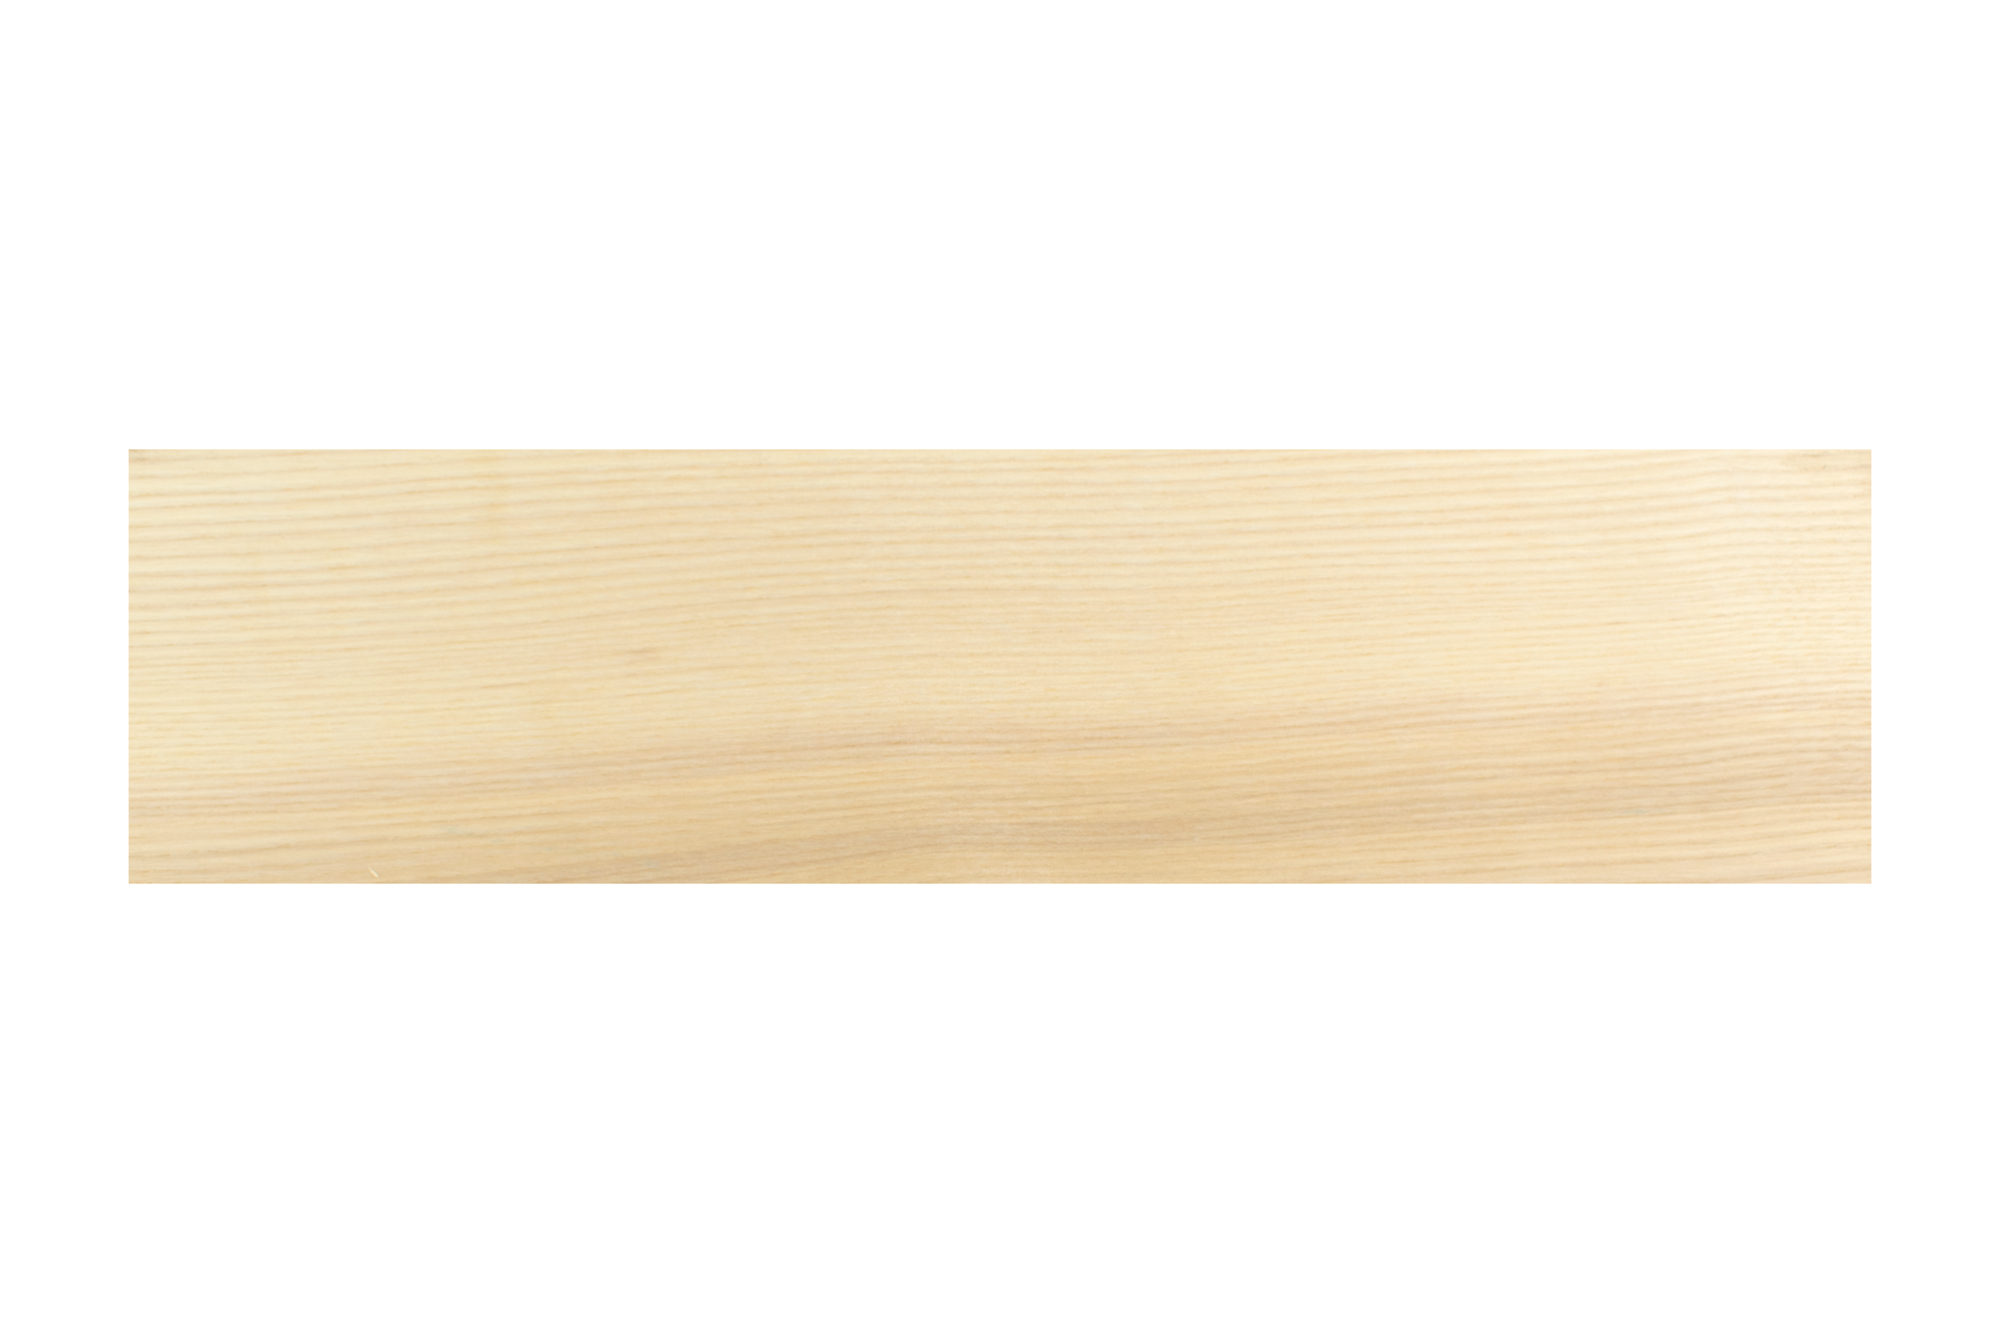 Ash Small Wood craft board 1/4 inch thick